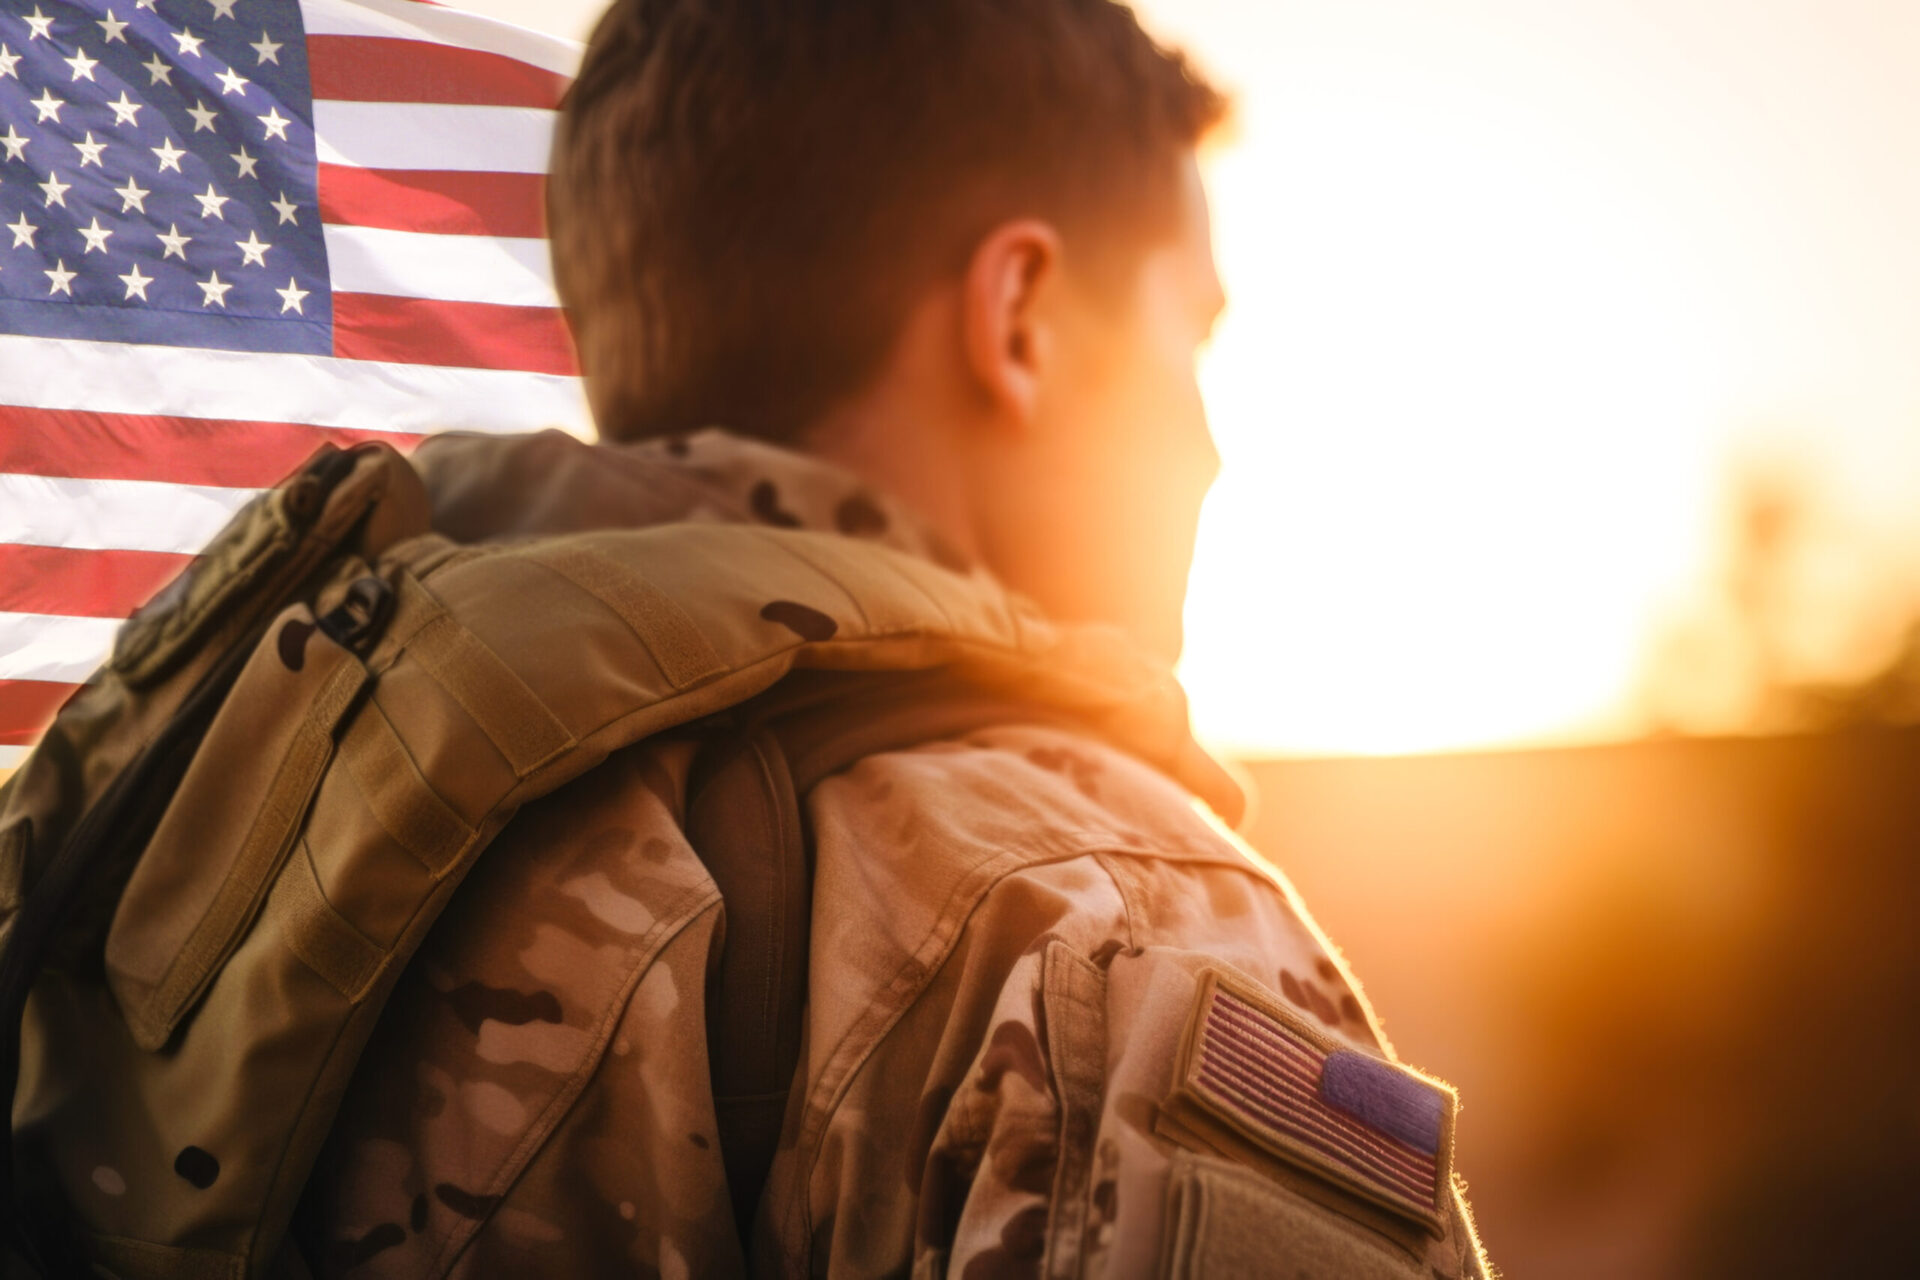 Survey: Only 3 In 10 Veterans Know About Zero Down Payment Benefit